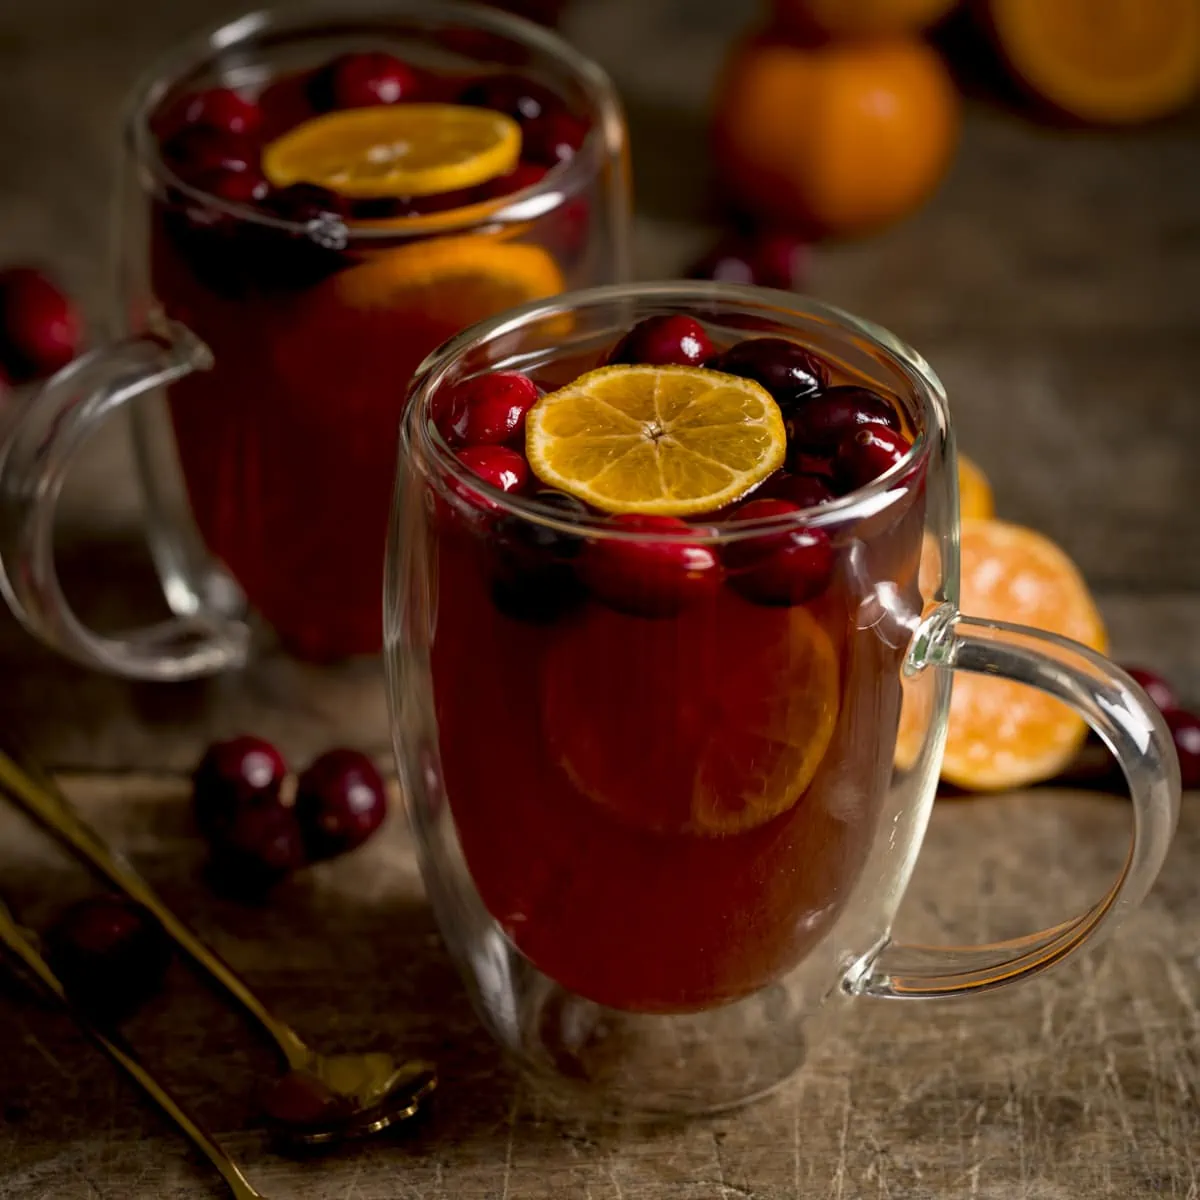 Square image of 2 glass mugs filled with mulled cider. There are clementine slices and cranberries in the cider and the mugs are on a wooden table.